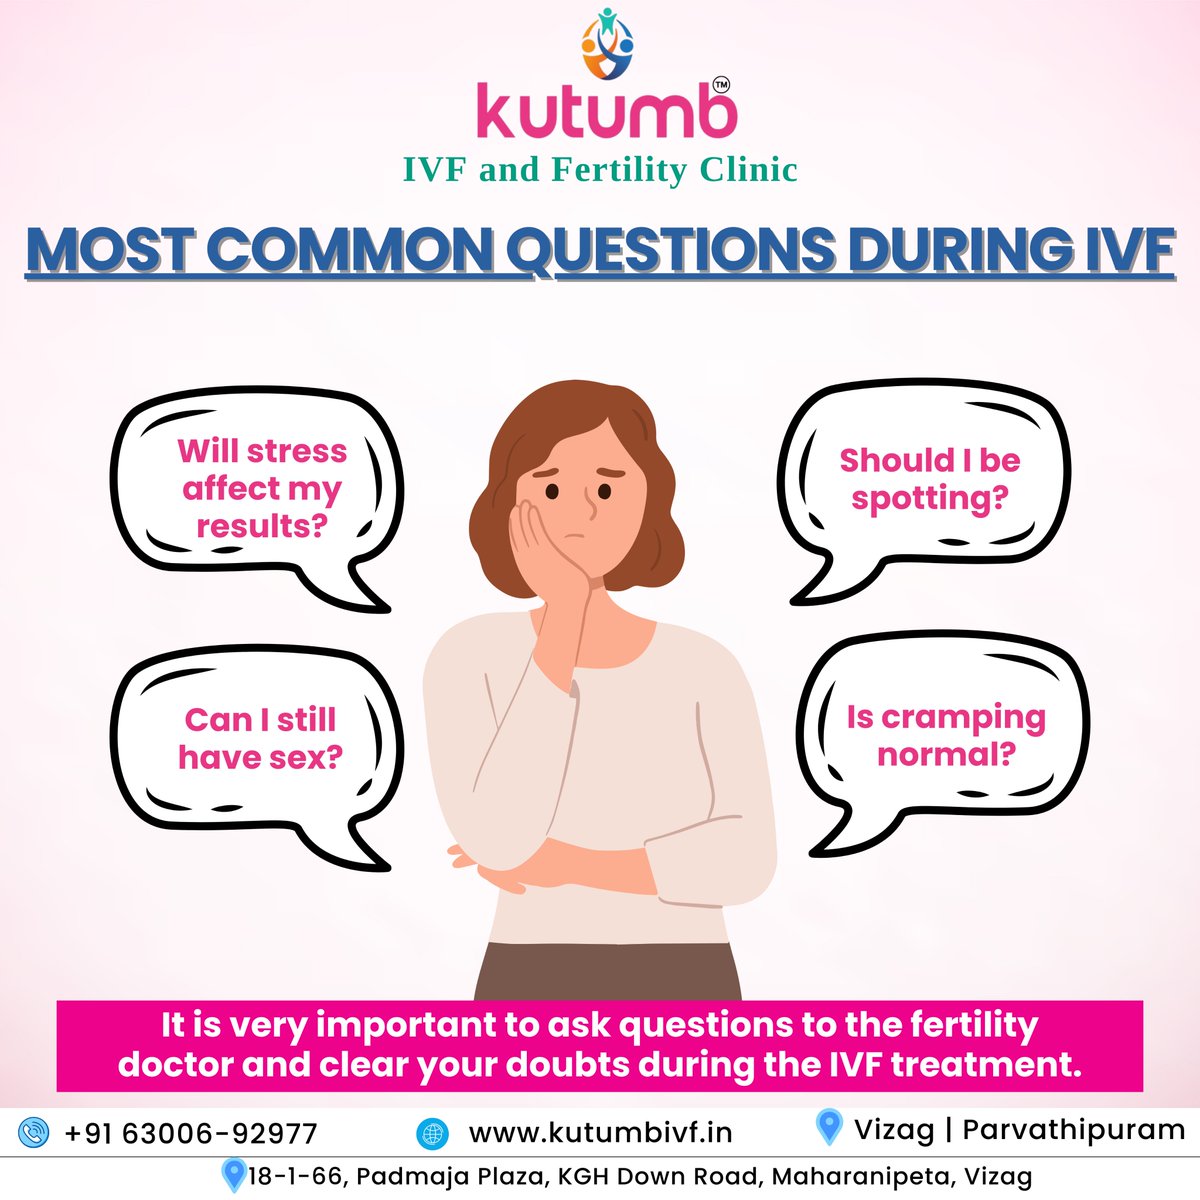 Embarking on an IVF journey often comes with questions and uncertainties. At Kutumb IVF, we understand the importance of addressing your concerns. Contact our expert now: +91 6300692977 #pregnancy #parenthood #ivf #ivfcost #testtubebaby #testtubebabycentre #ivftreatment #vizag